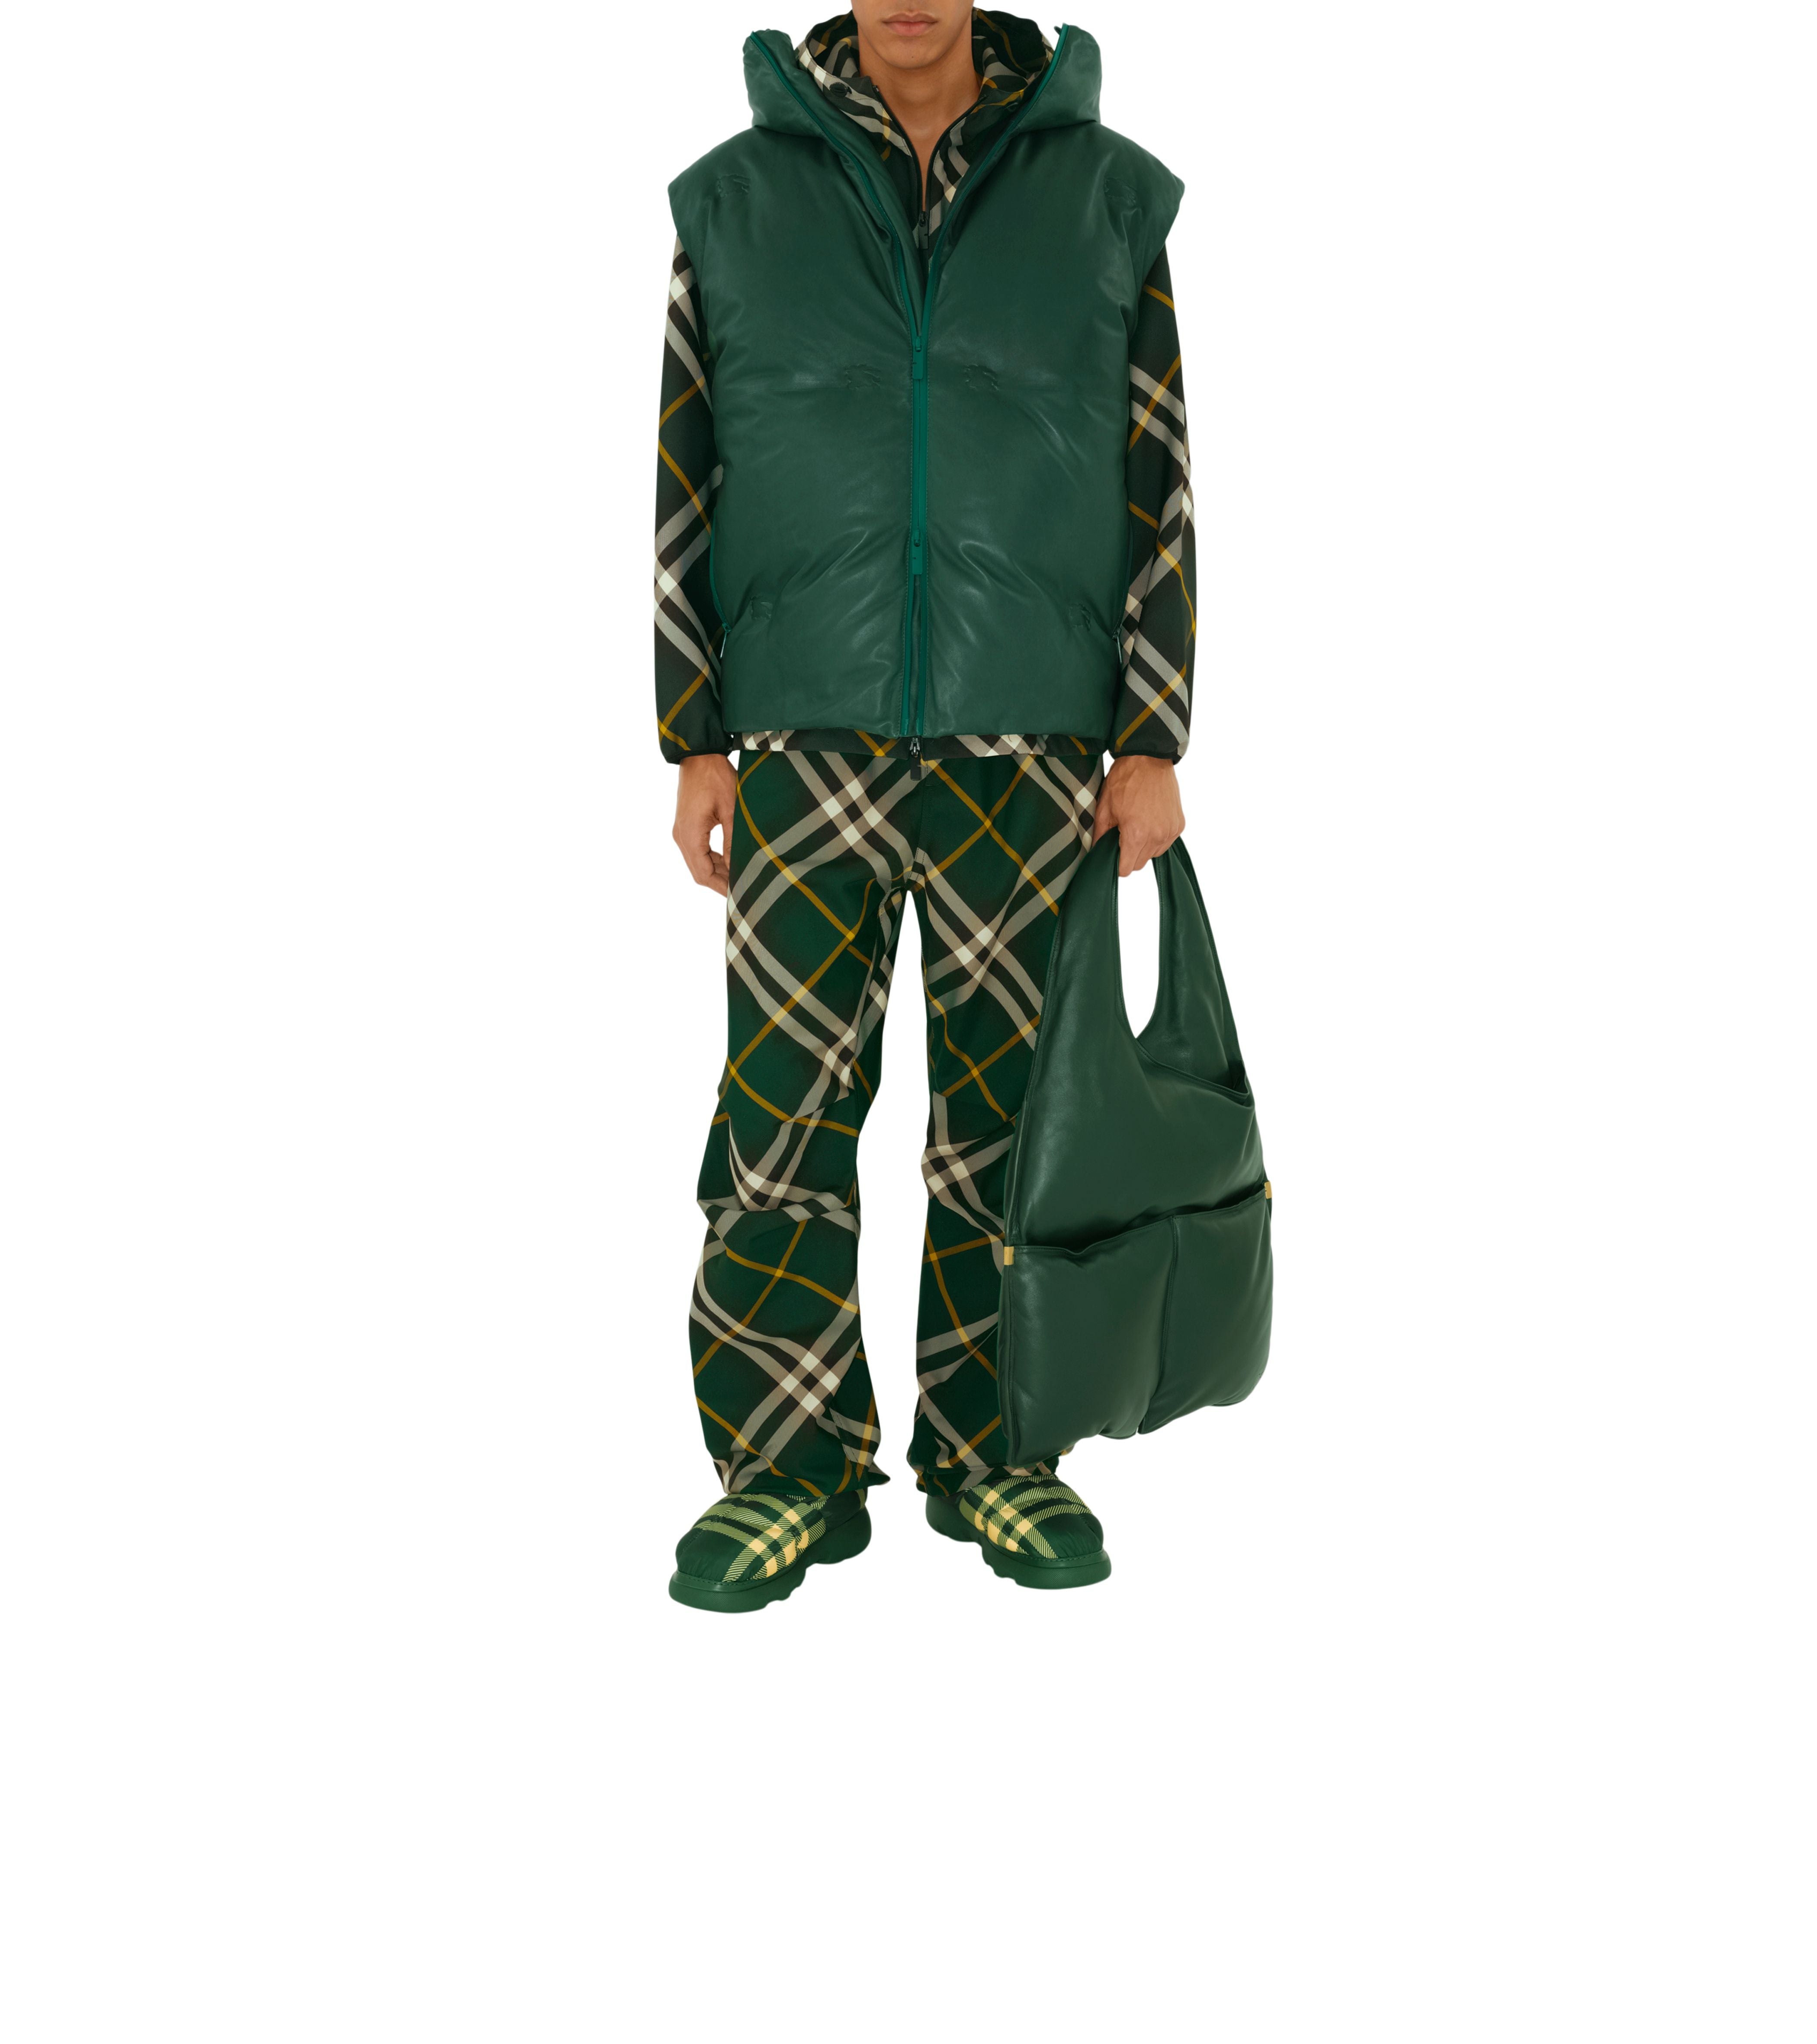 BURBERRY | CHECK TROUSERS